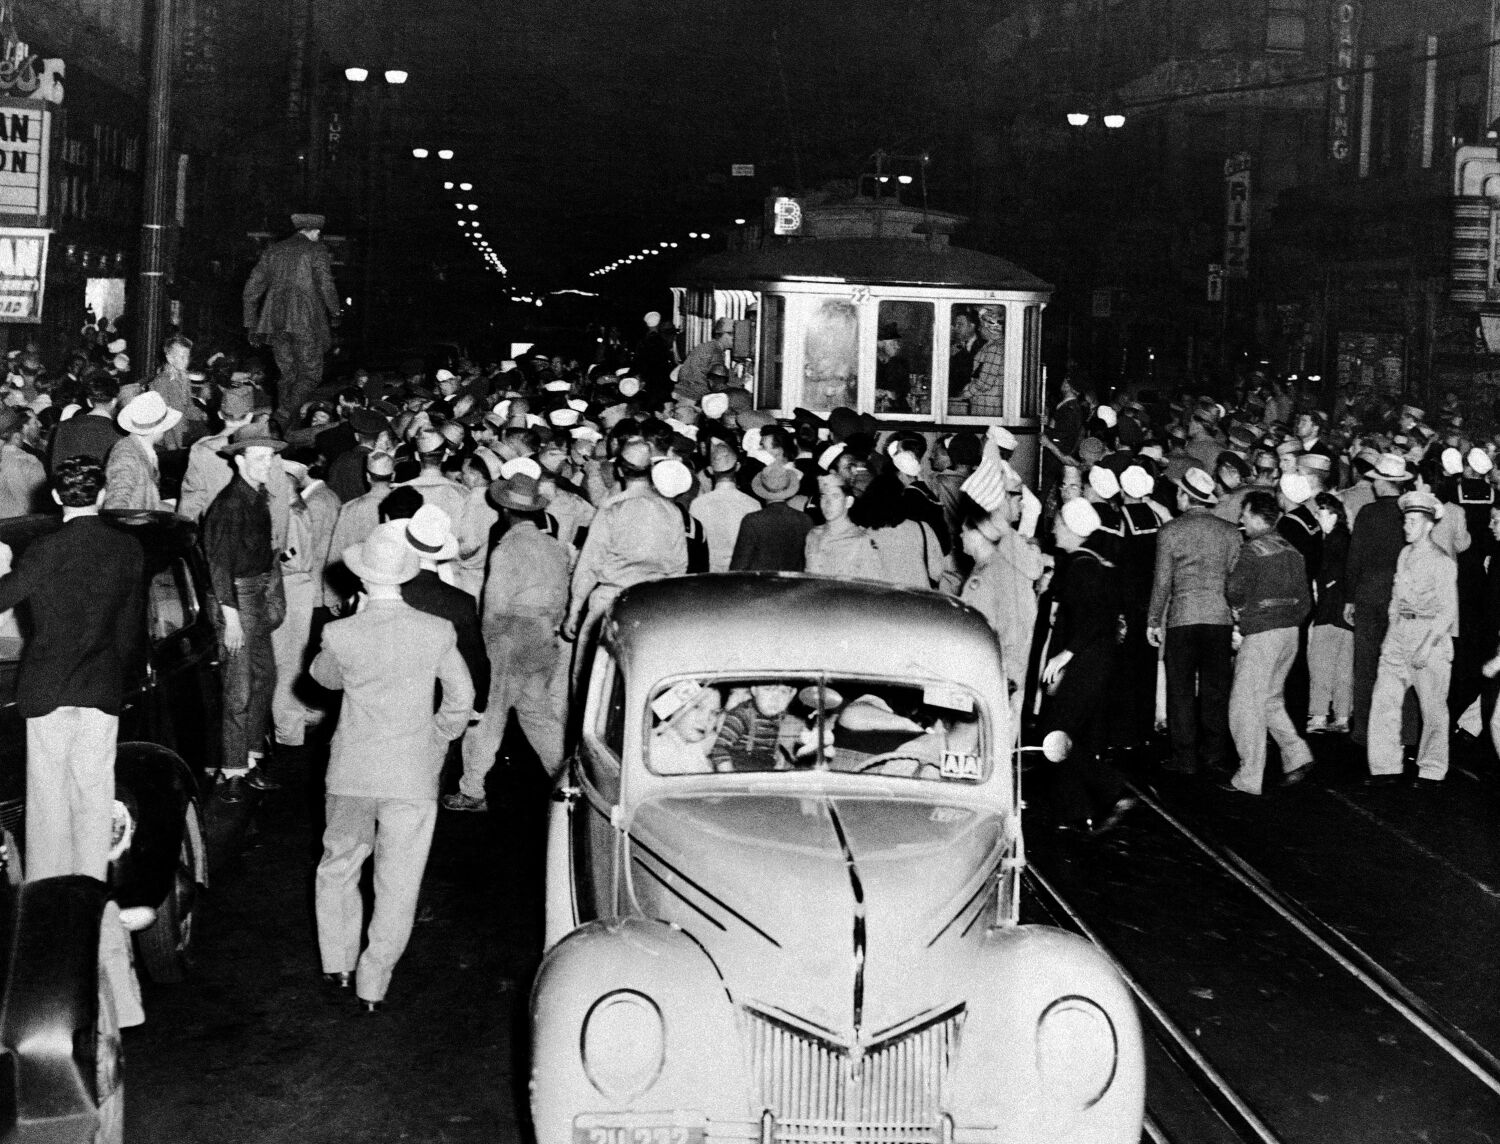 L.A. apologizes for city's role in Zoot Suit riots